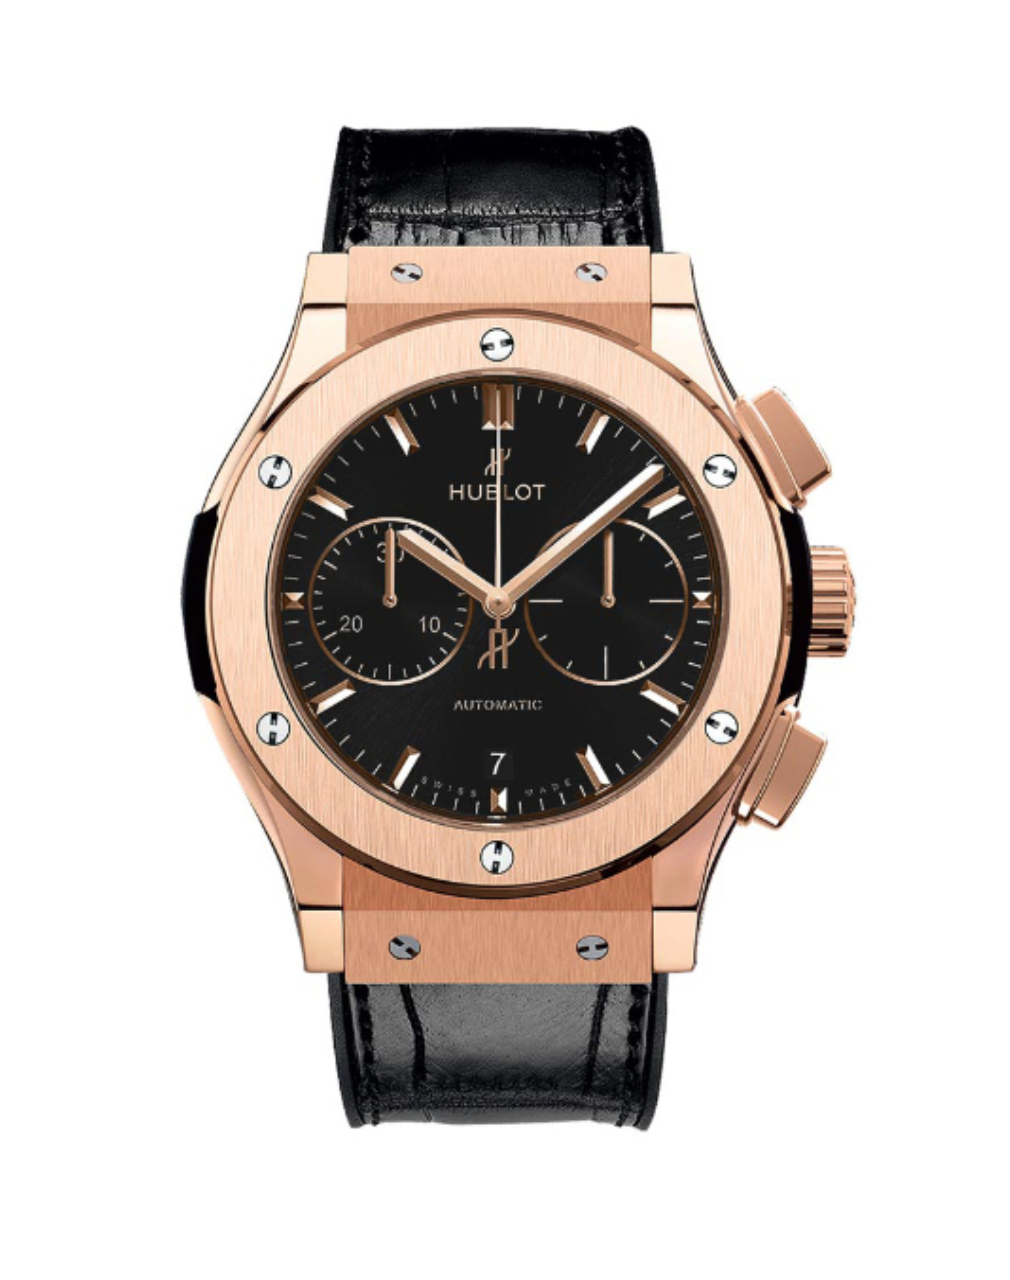 Classic Fusion Chronograph King Gold 42mm 541.OX.1181.LR